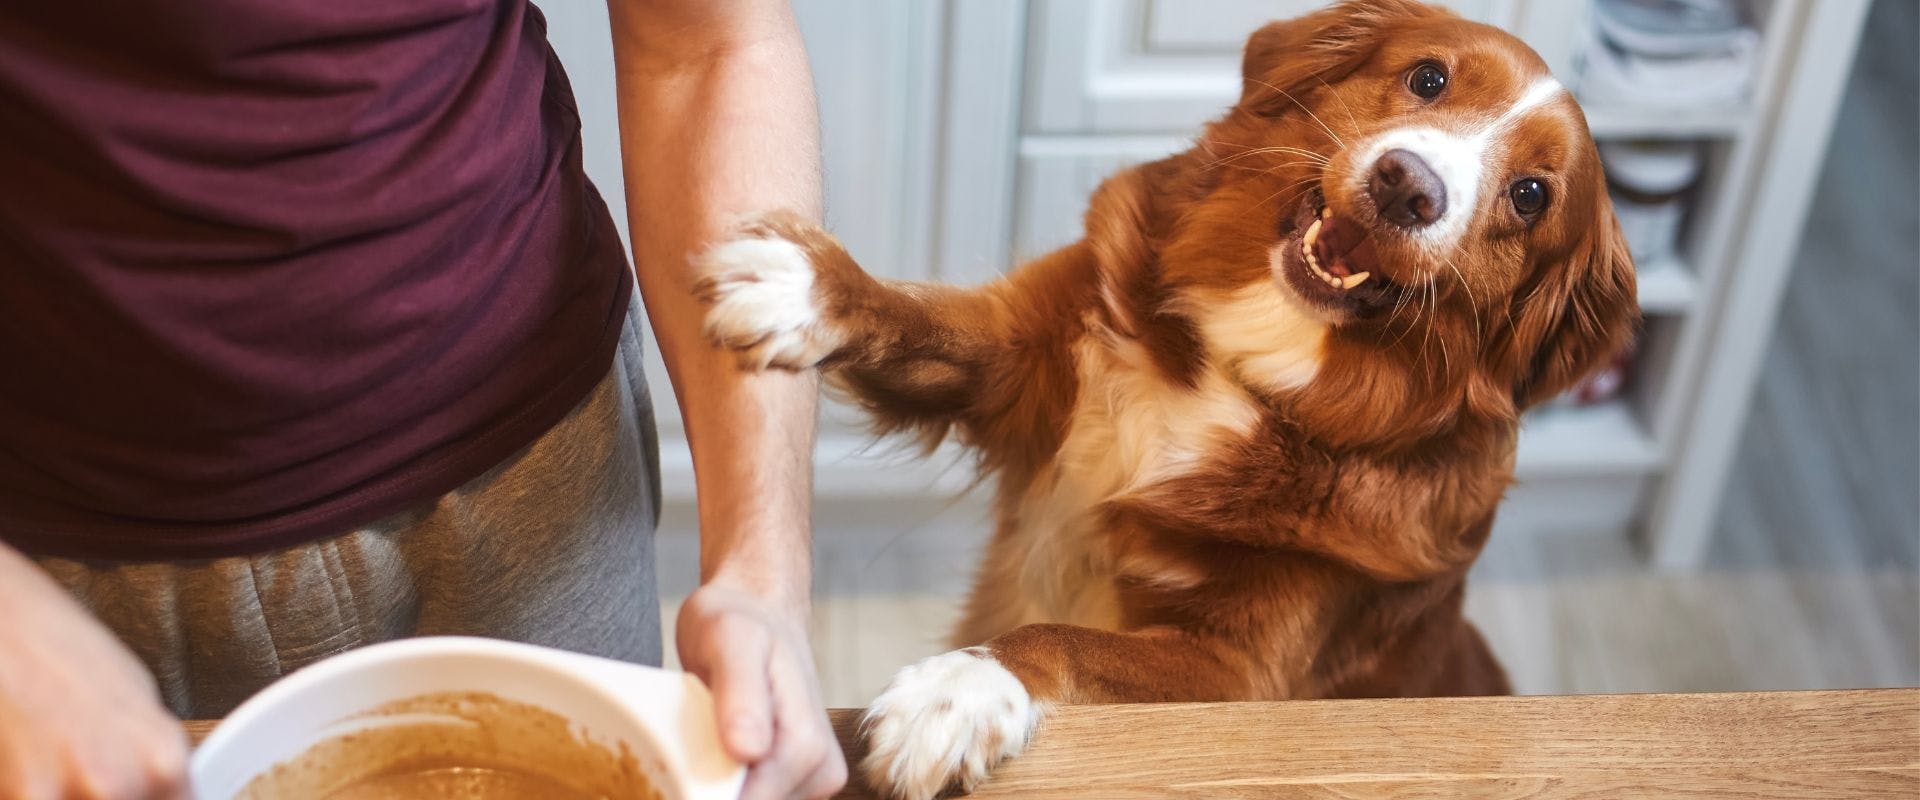 Brown and white dog jumping up at the kitchen side while owner is baking